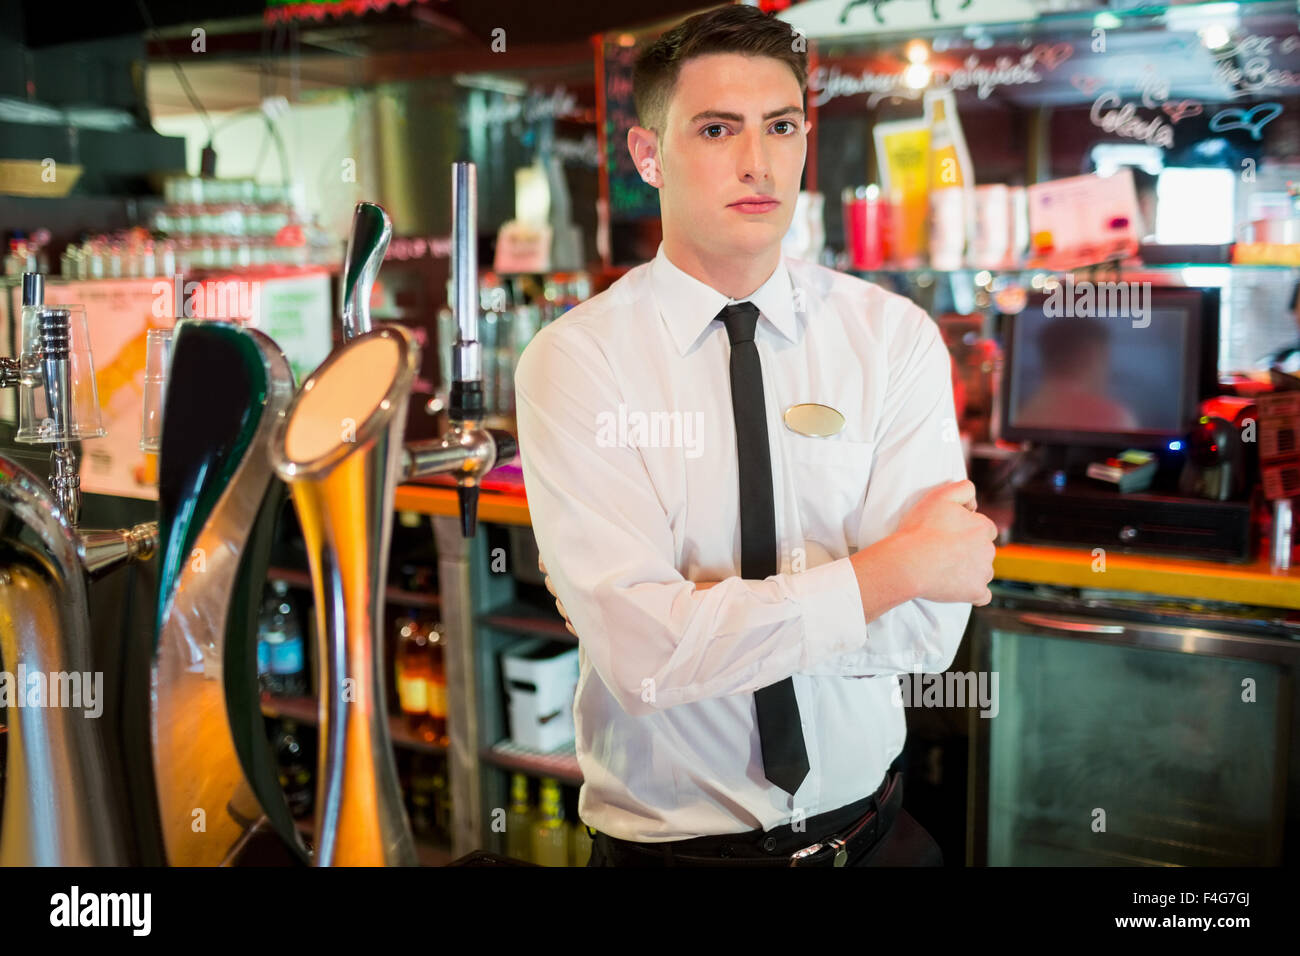 Well dressed barkeeper with crossed arms Stock Photo